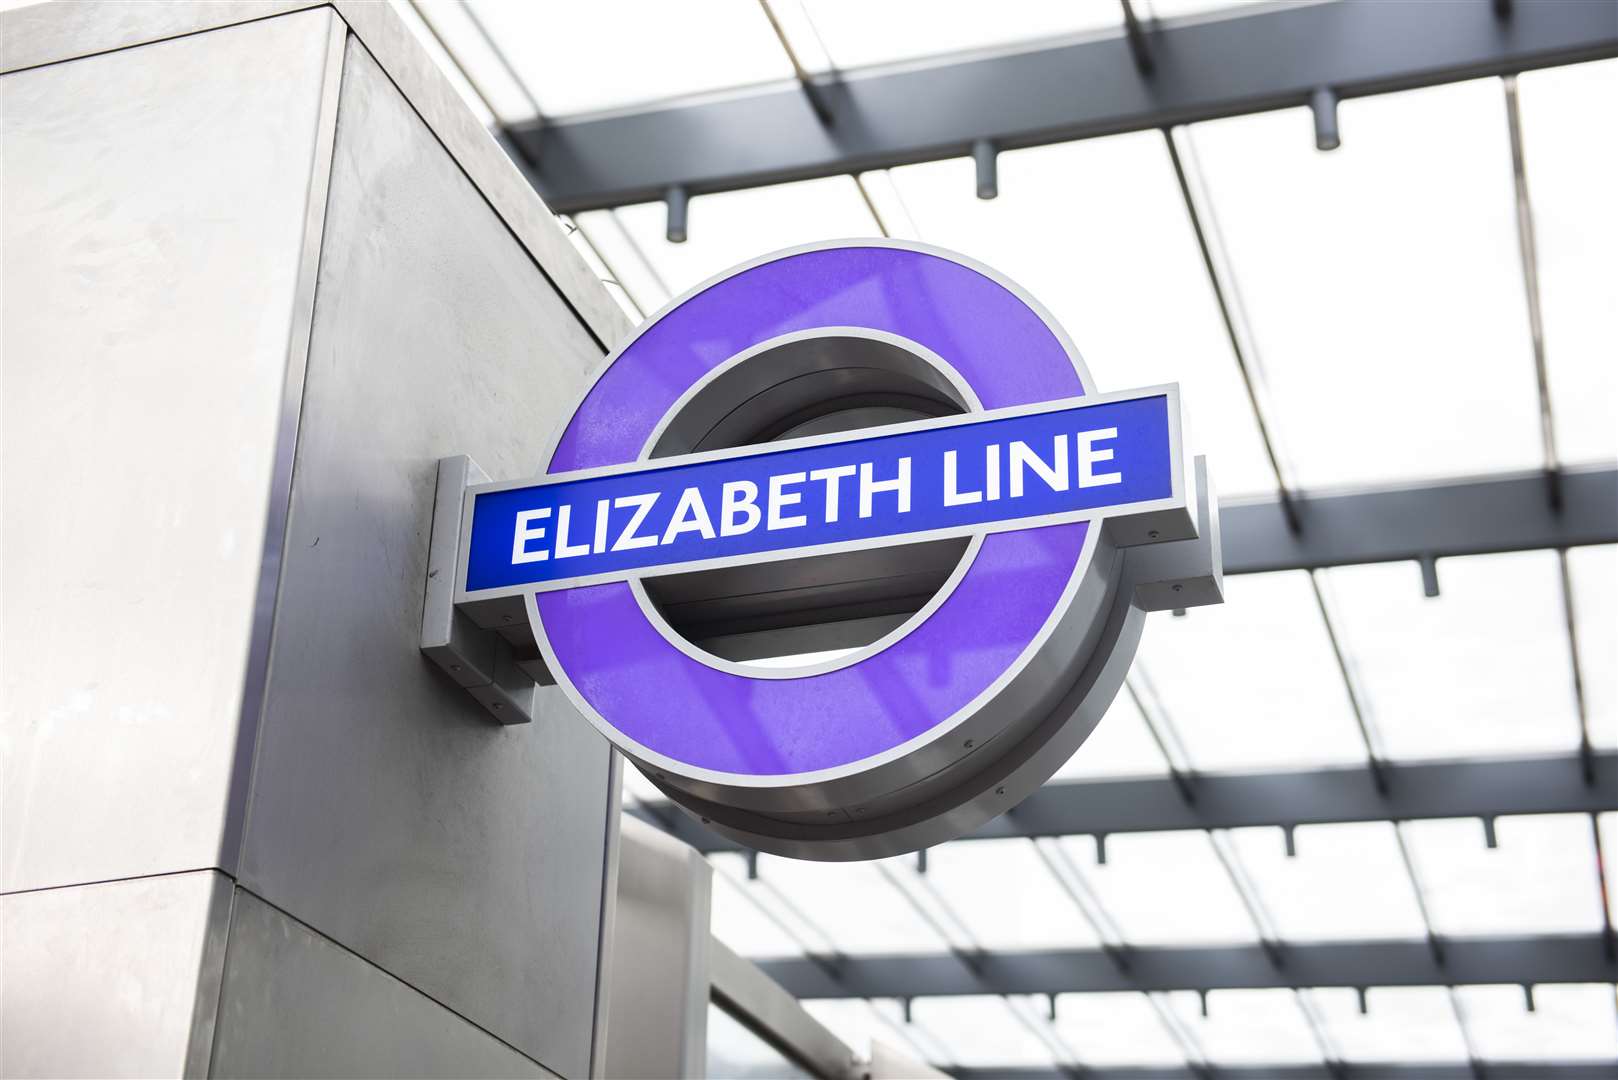 There are also changes to the new Elizabeth Line this week